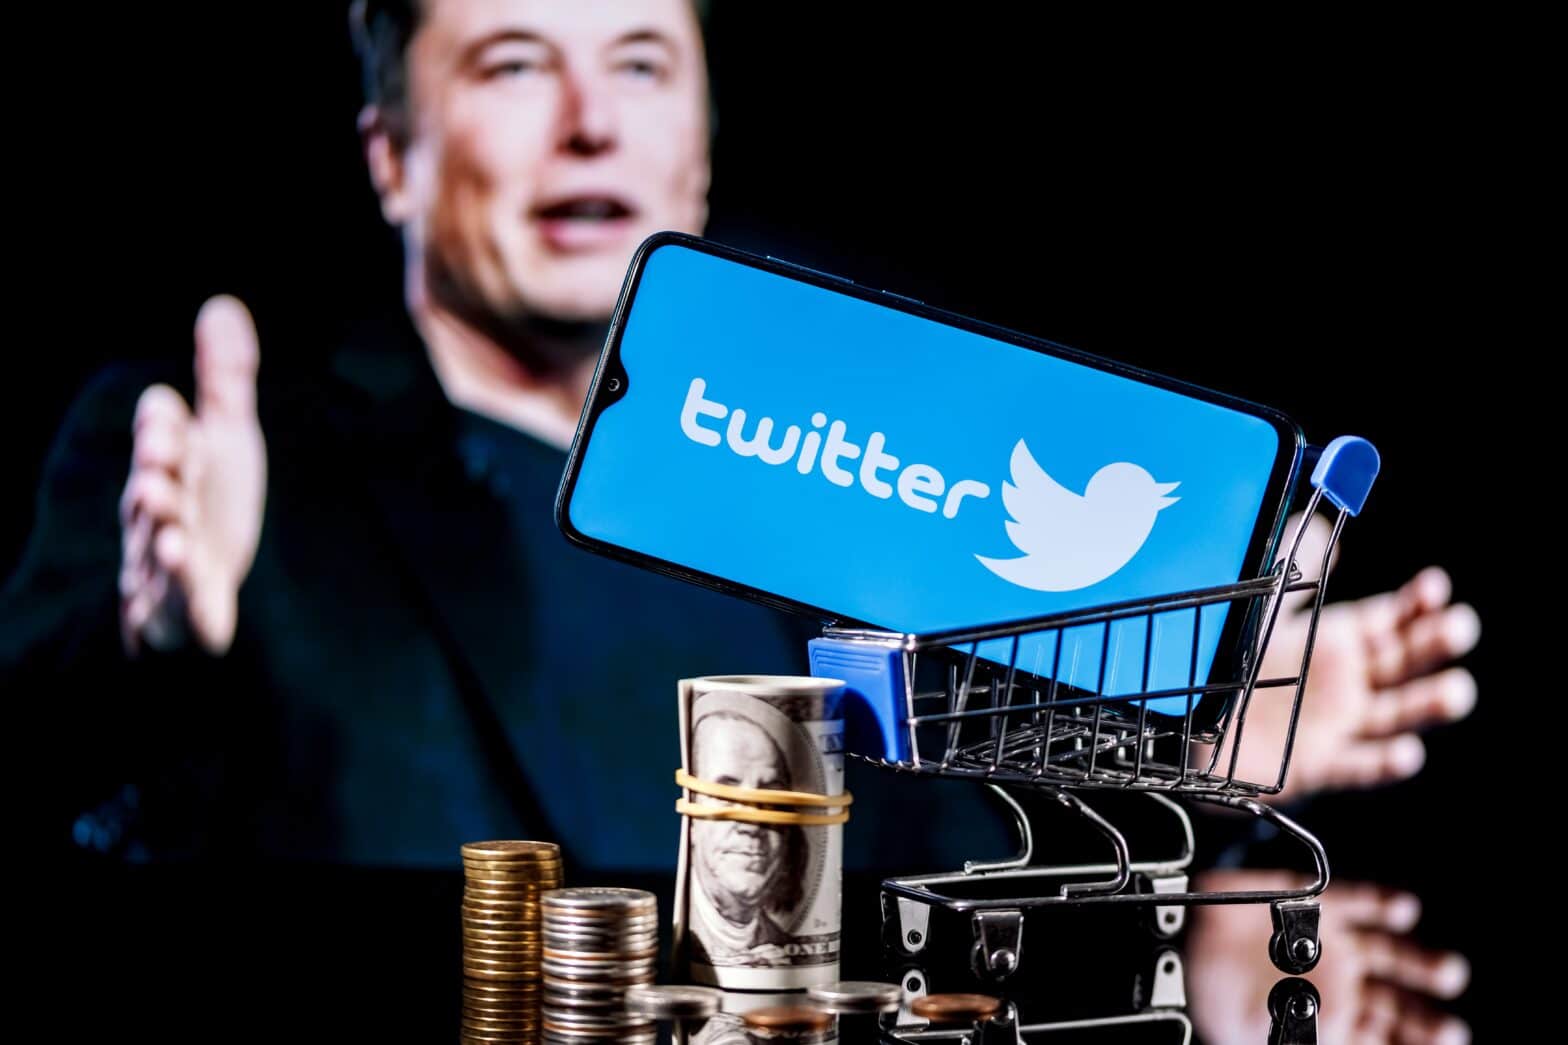 Elon Musk, just effing call Joanne Z. Tan, to be your brand's filter, manager, protector, due to Twitter fiasco & your reckless words & acts. Save your brand!